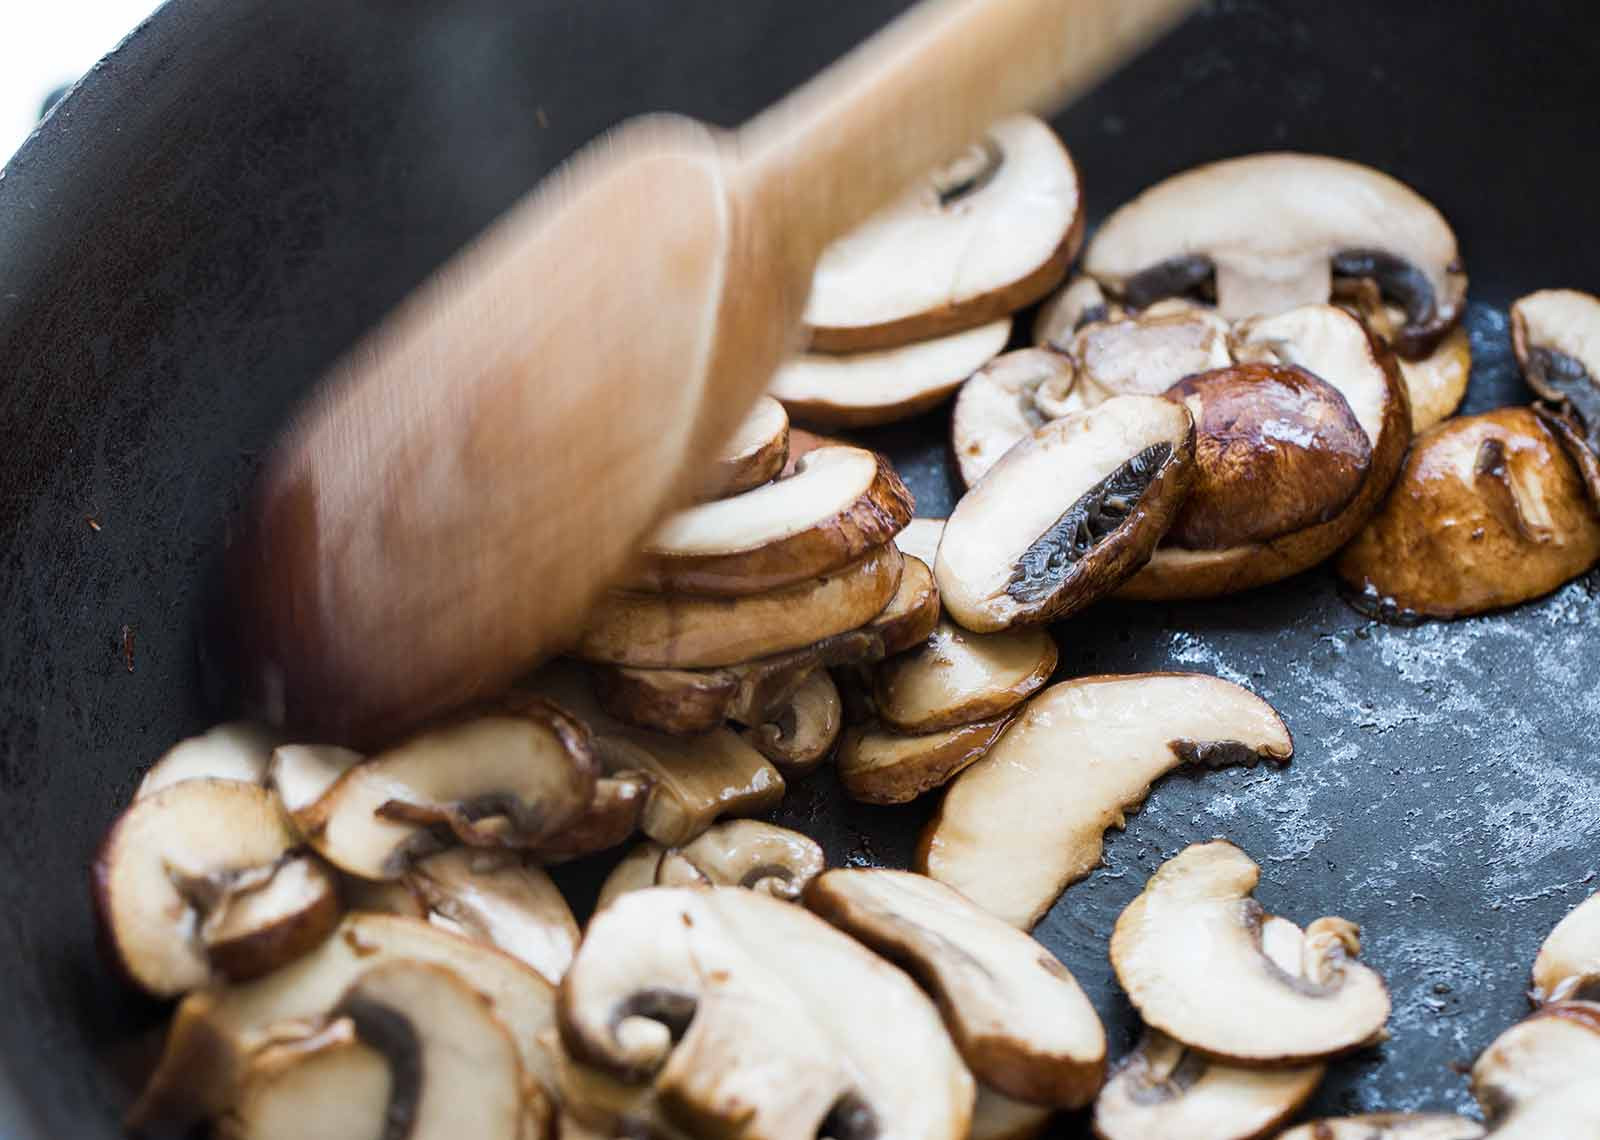 Cook Mushroom In Microwave
 A Better Way to Cook Mushrooms